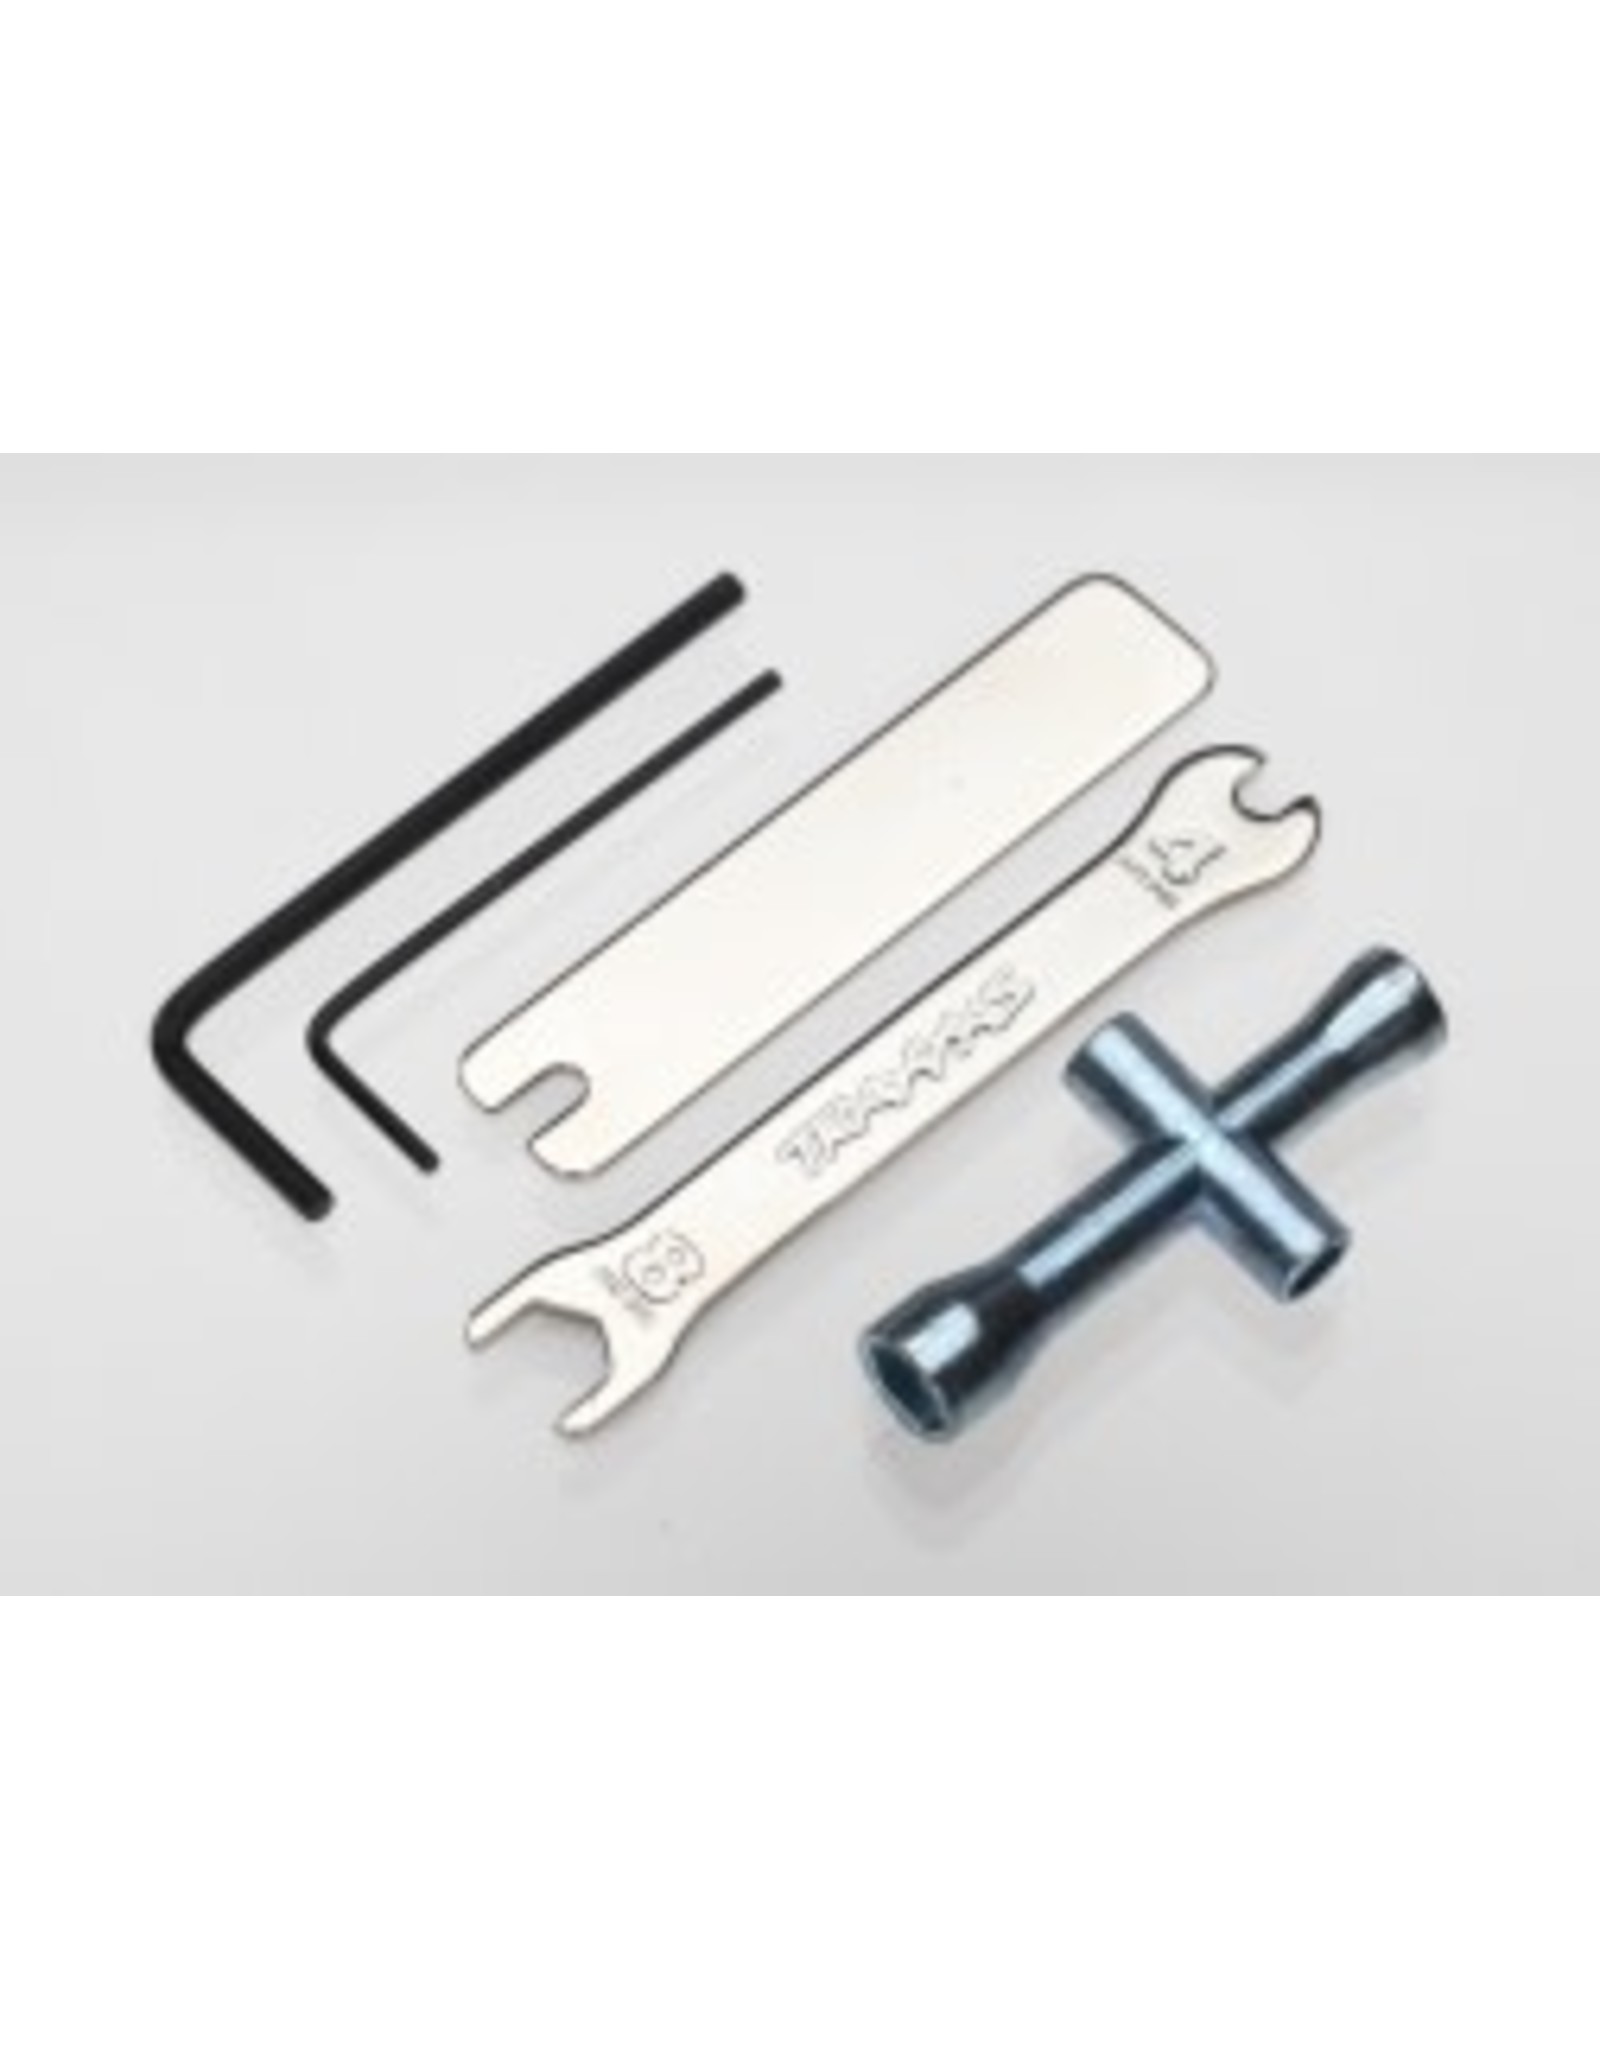 Traxxas Tool Set (1.5mm &2.5mm allens/ 4-way lug, 8mm &4mm wrench & U-joint wrenches)